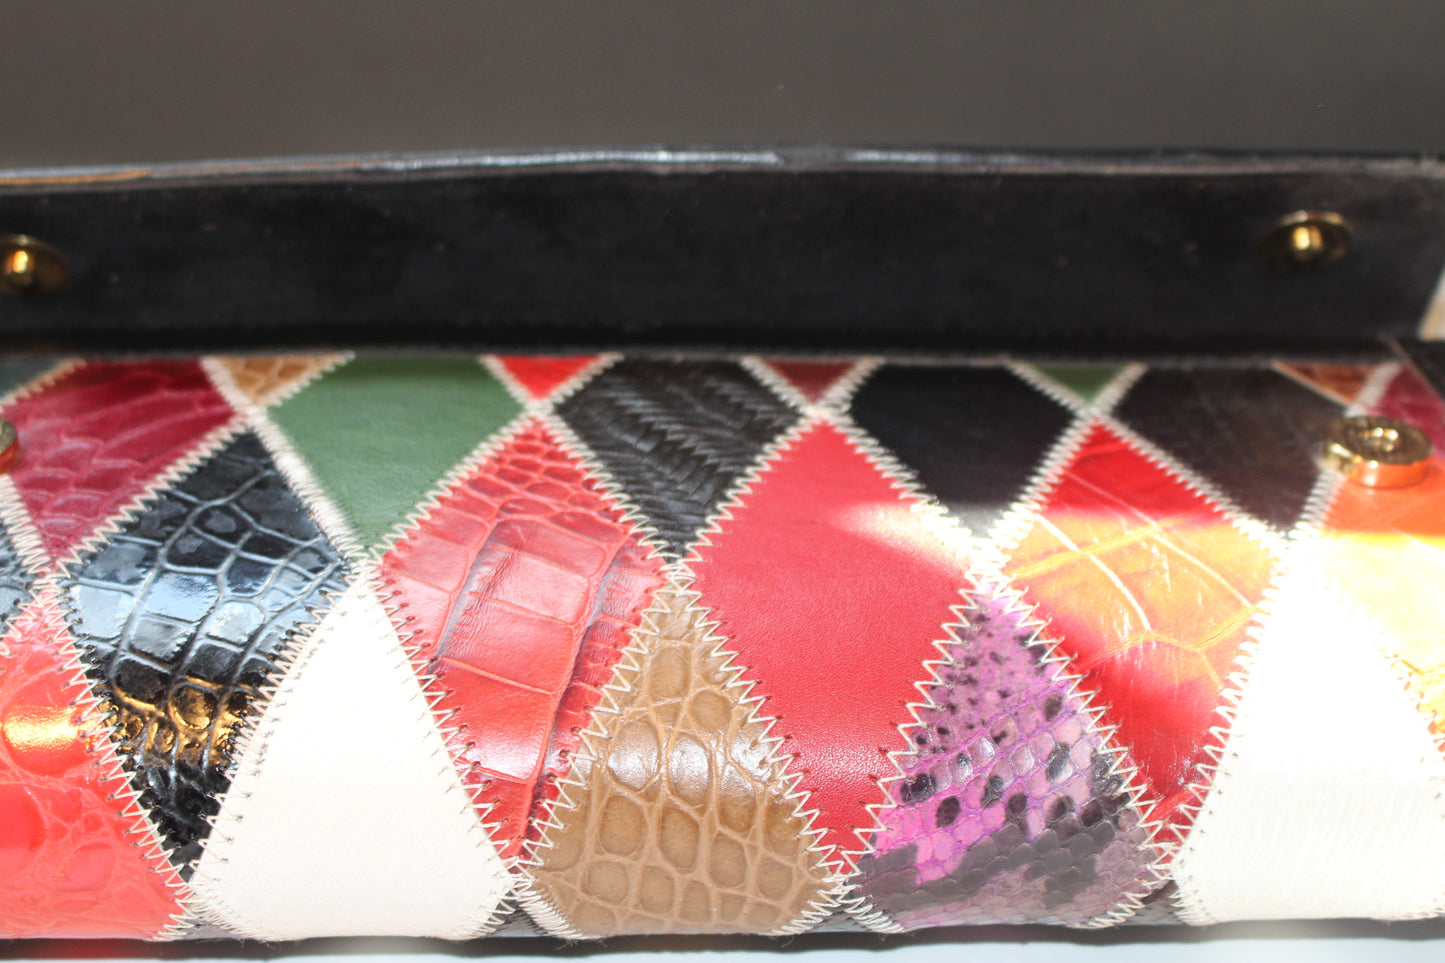 Leather Patterned Clutch/Purse - Nubian Goods